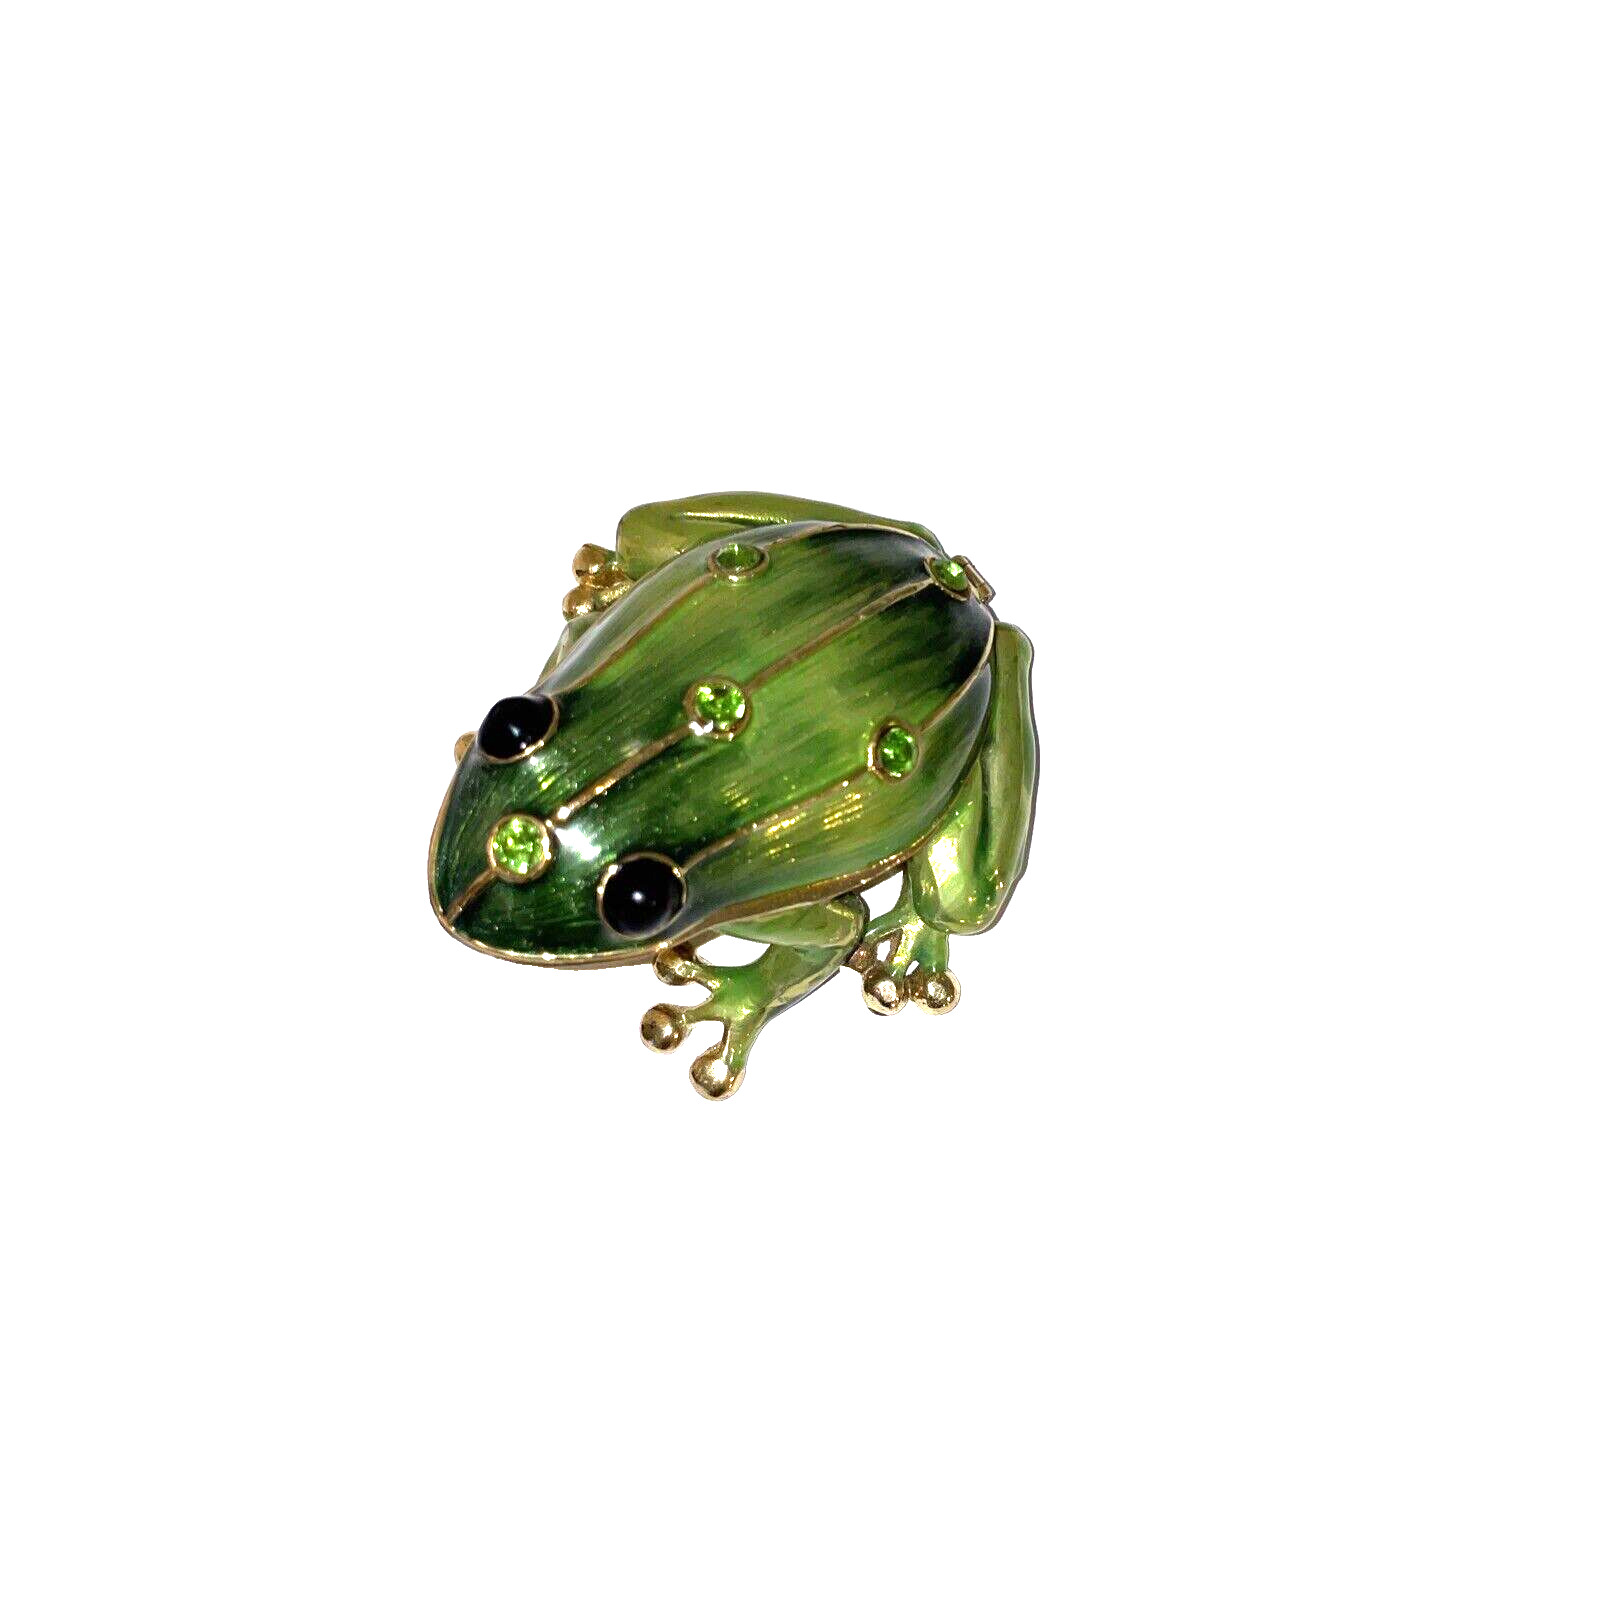 Green Frog Hand Painted Bejeweled Hinged Trinket Jewelry Box 3